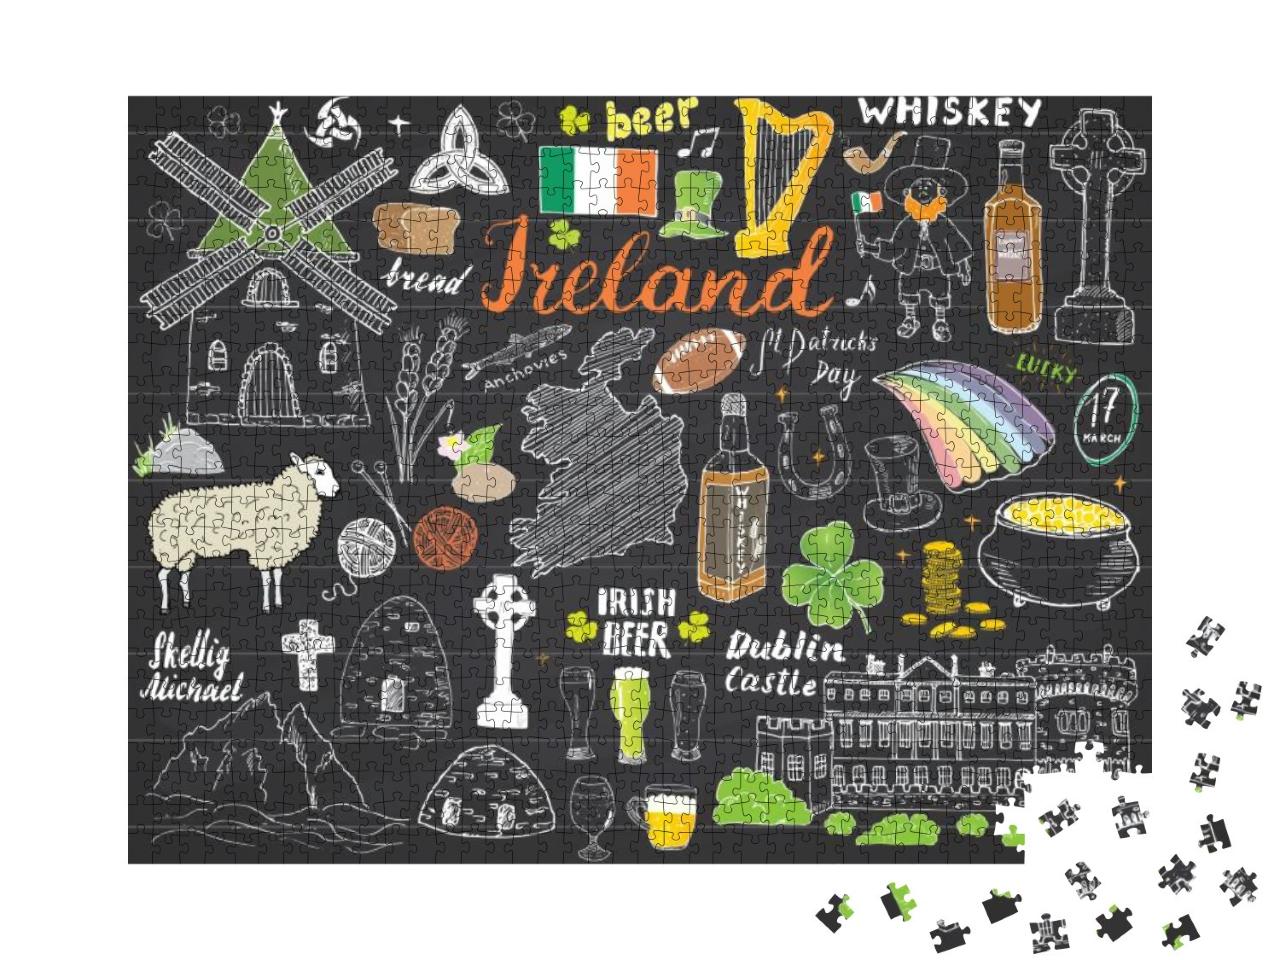 Ireland Sketch Doodles. Hand Drawn Irish Elements Set wit... Jigsaw Puzzle with 1000 pieces